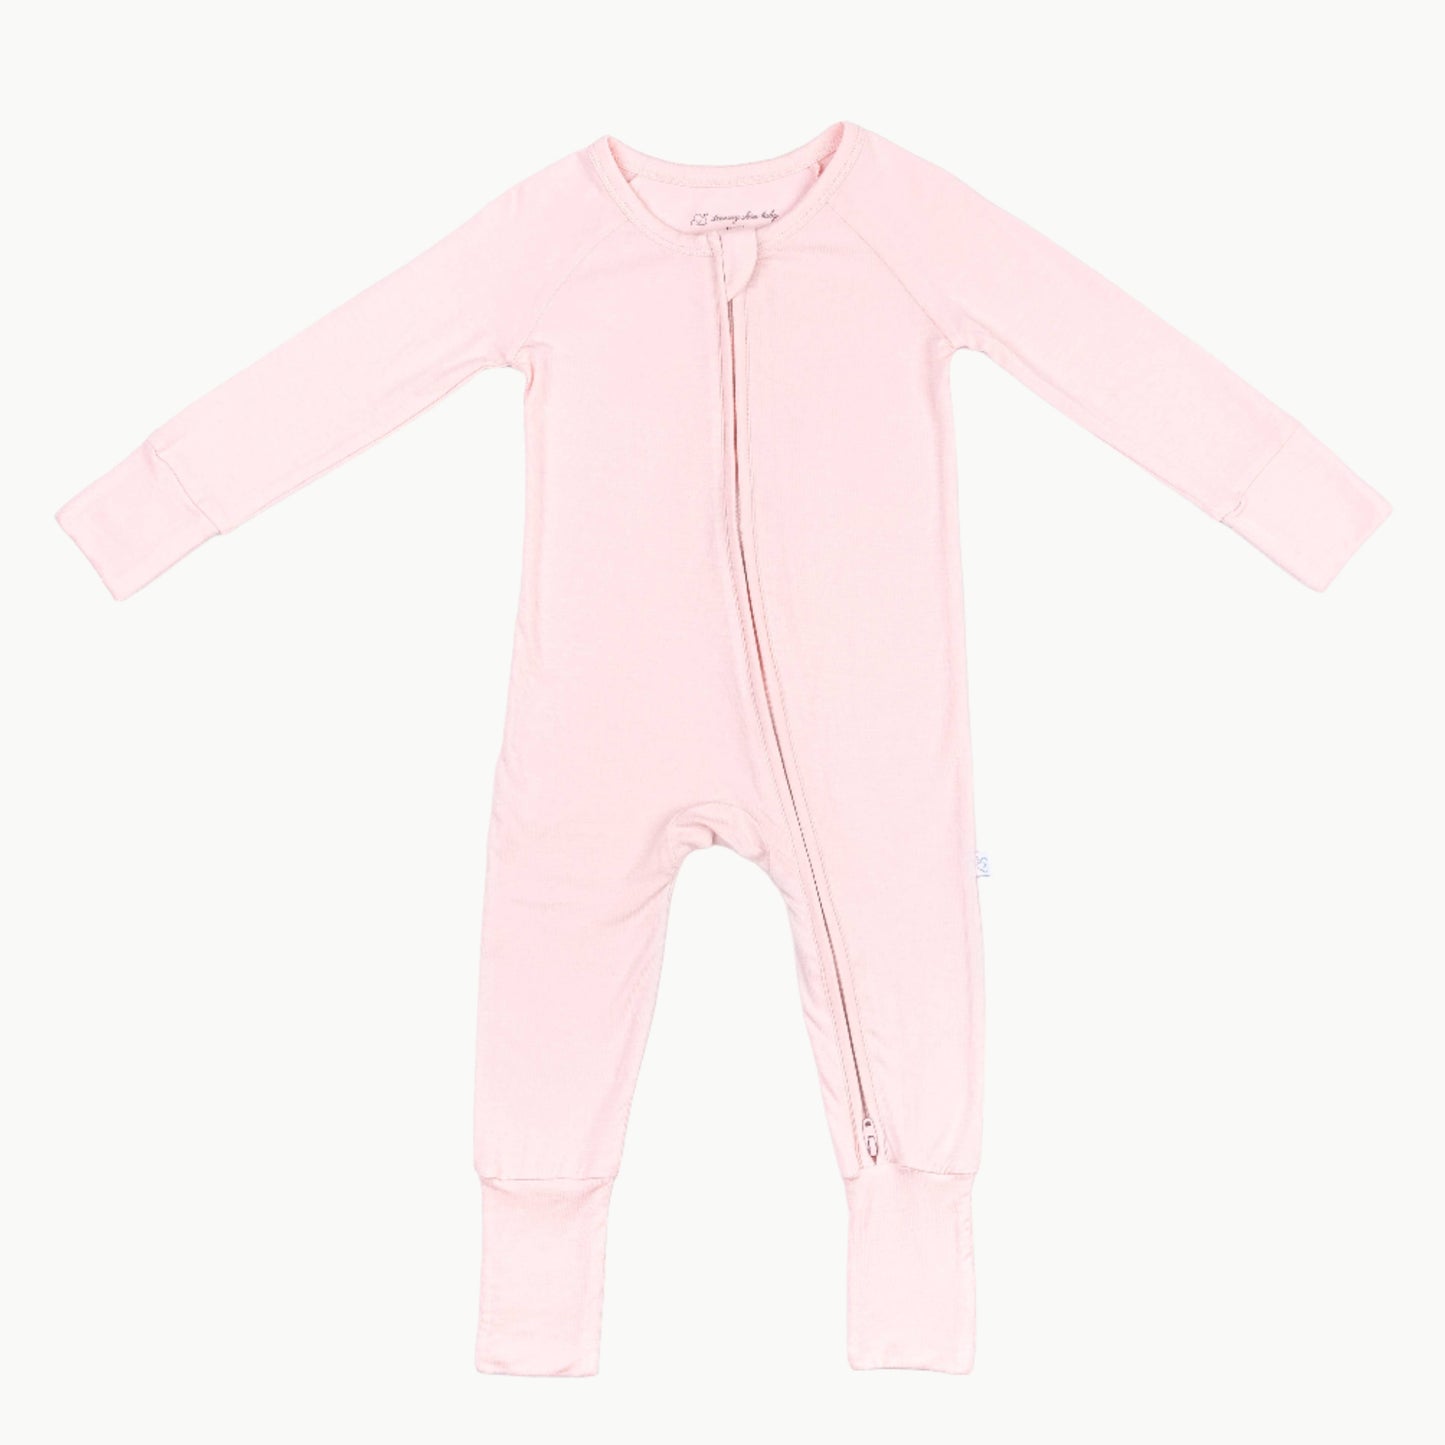 Bamboo Convertible Romper in Pink Sand